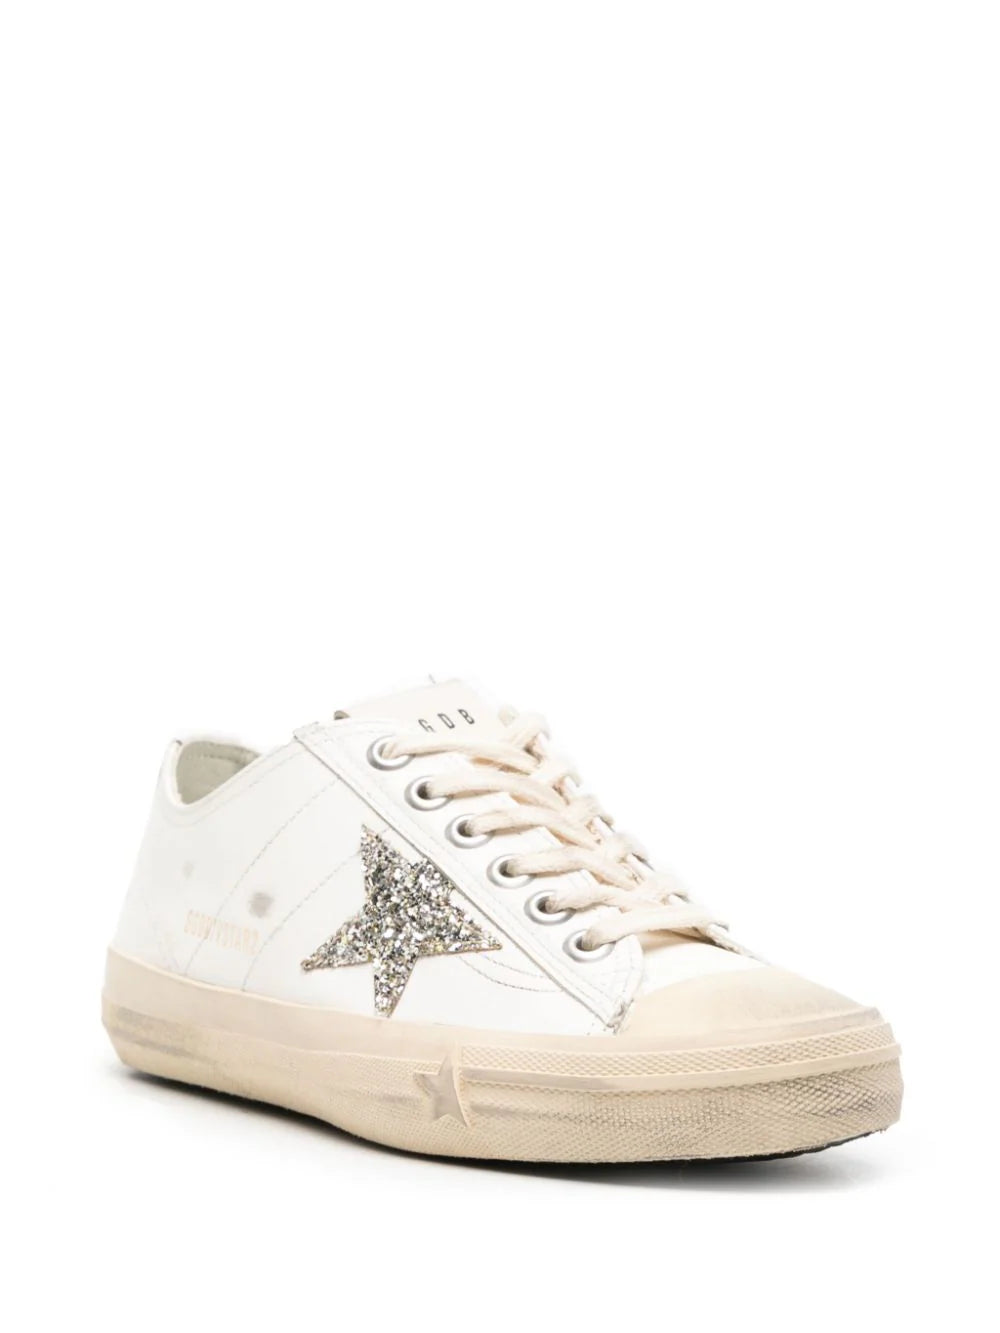 V-Star 2 distressed sneakers